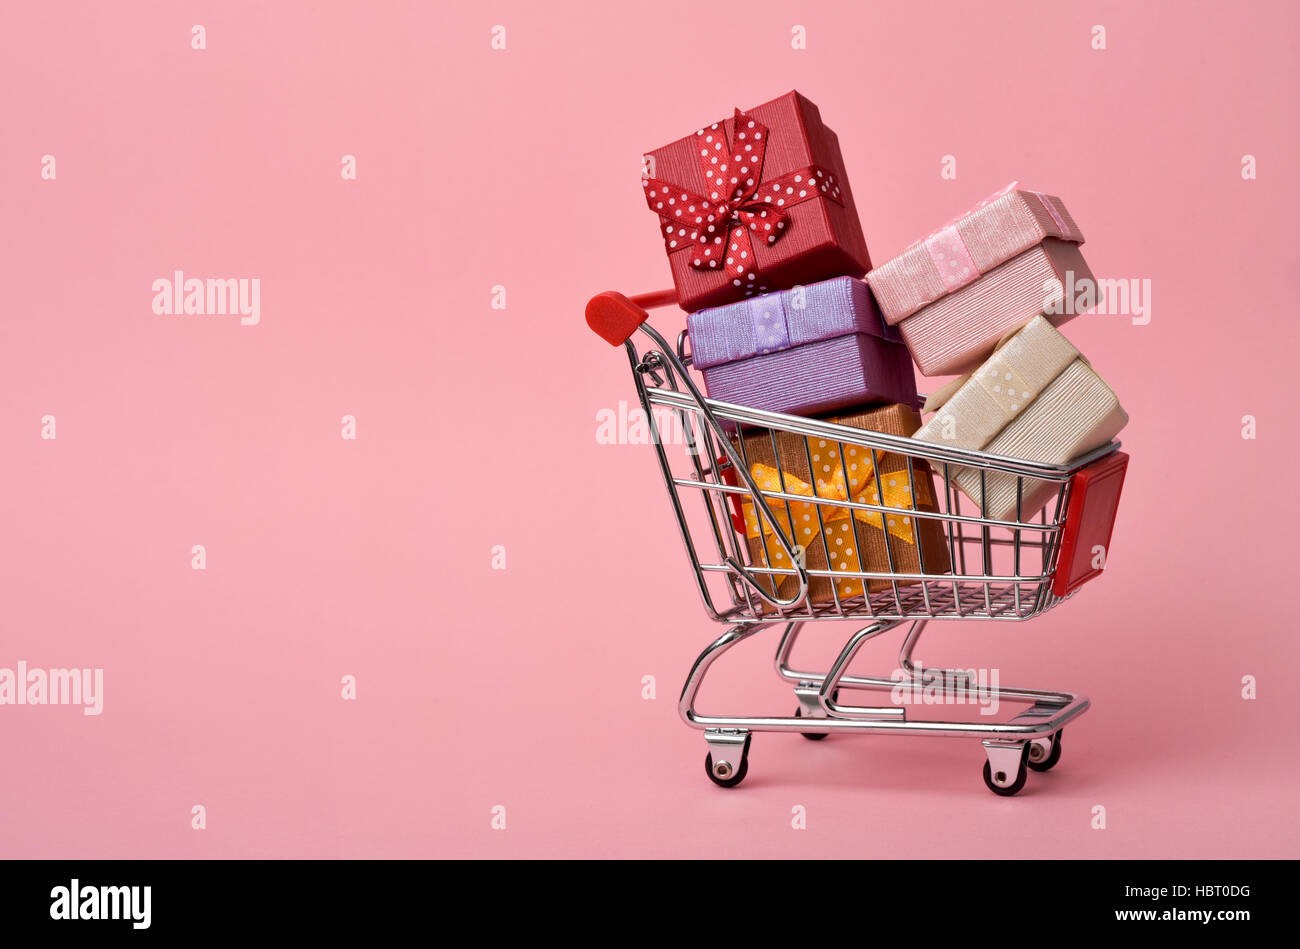 a shopping cart full of gifts of different colors on a pink background, with a negative space Stock Photo